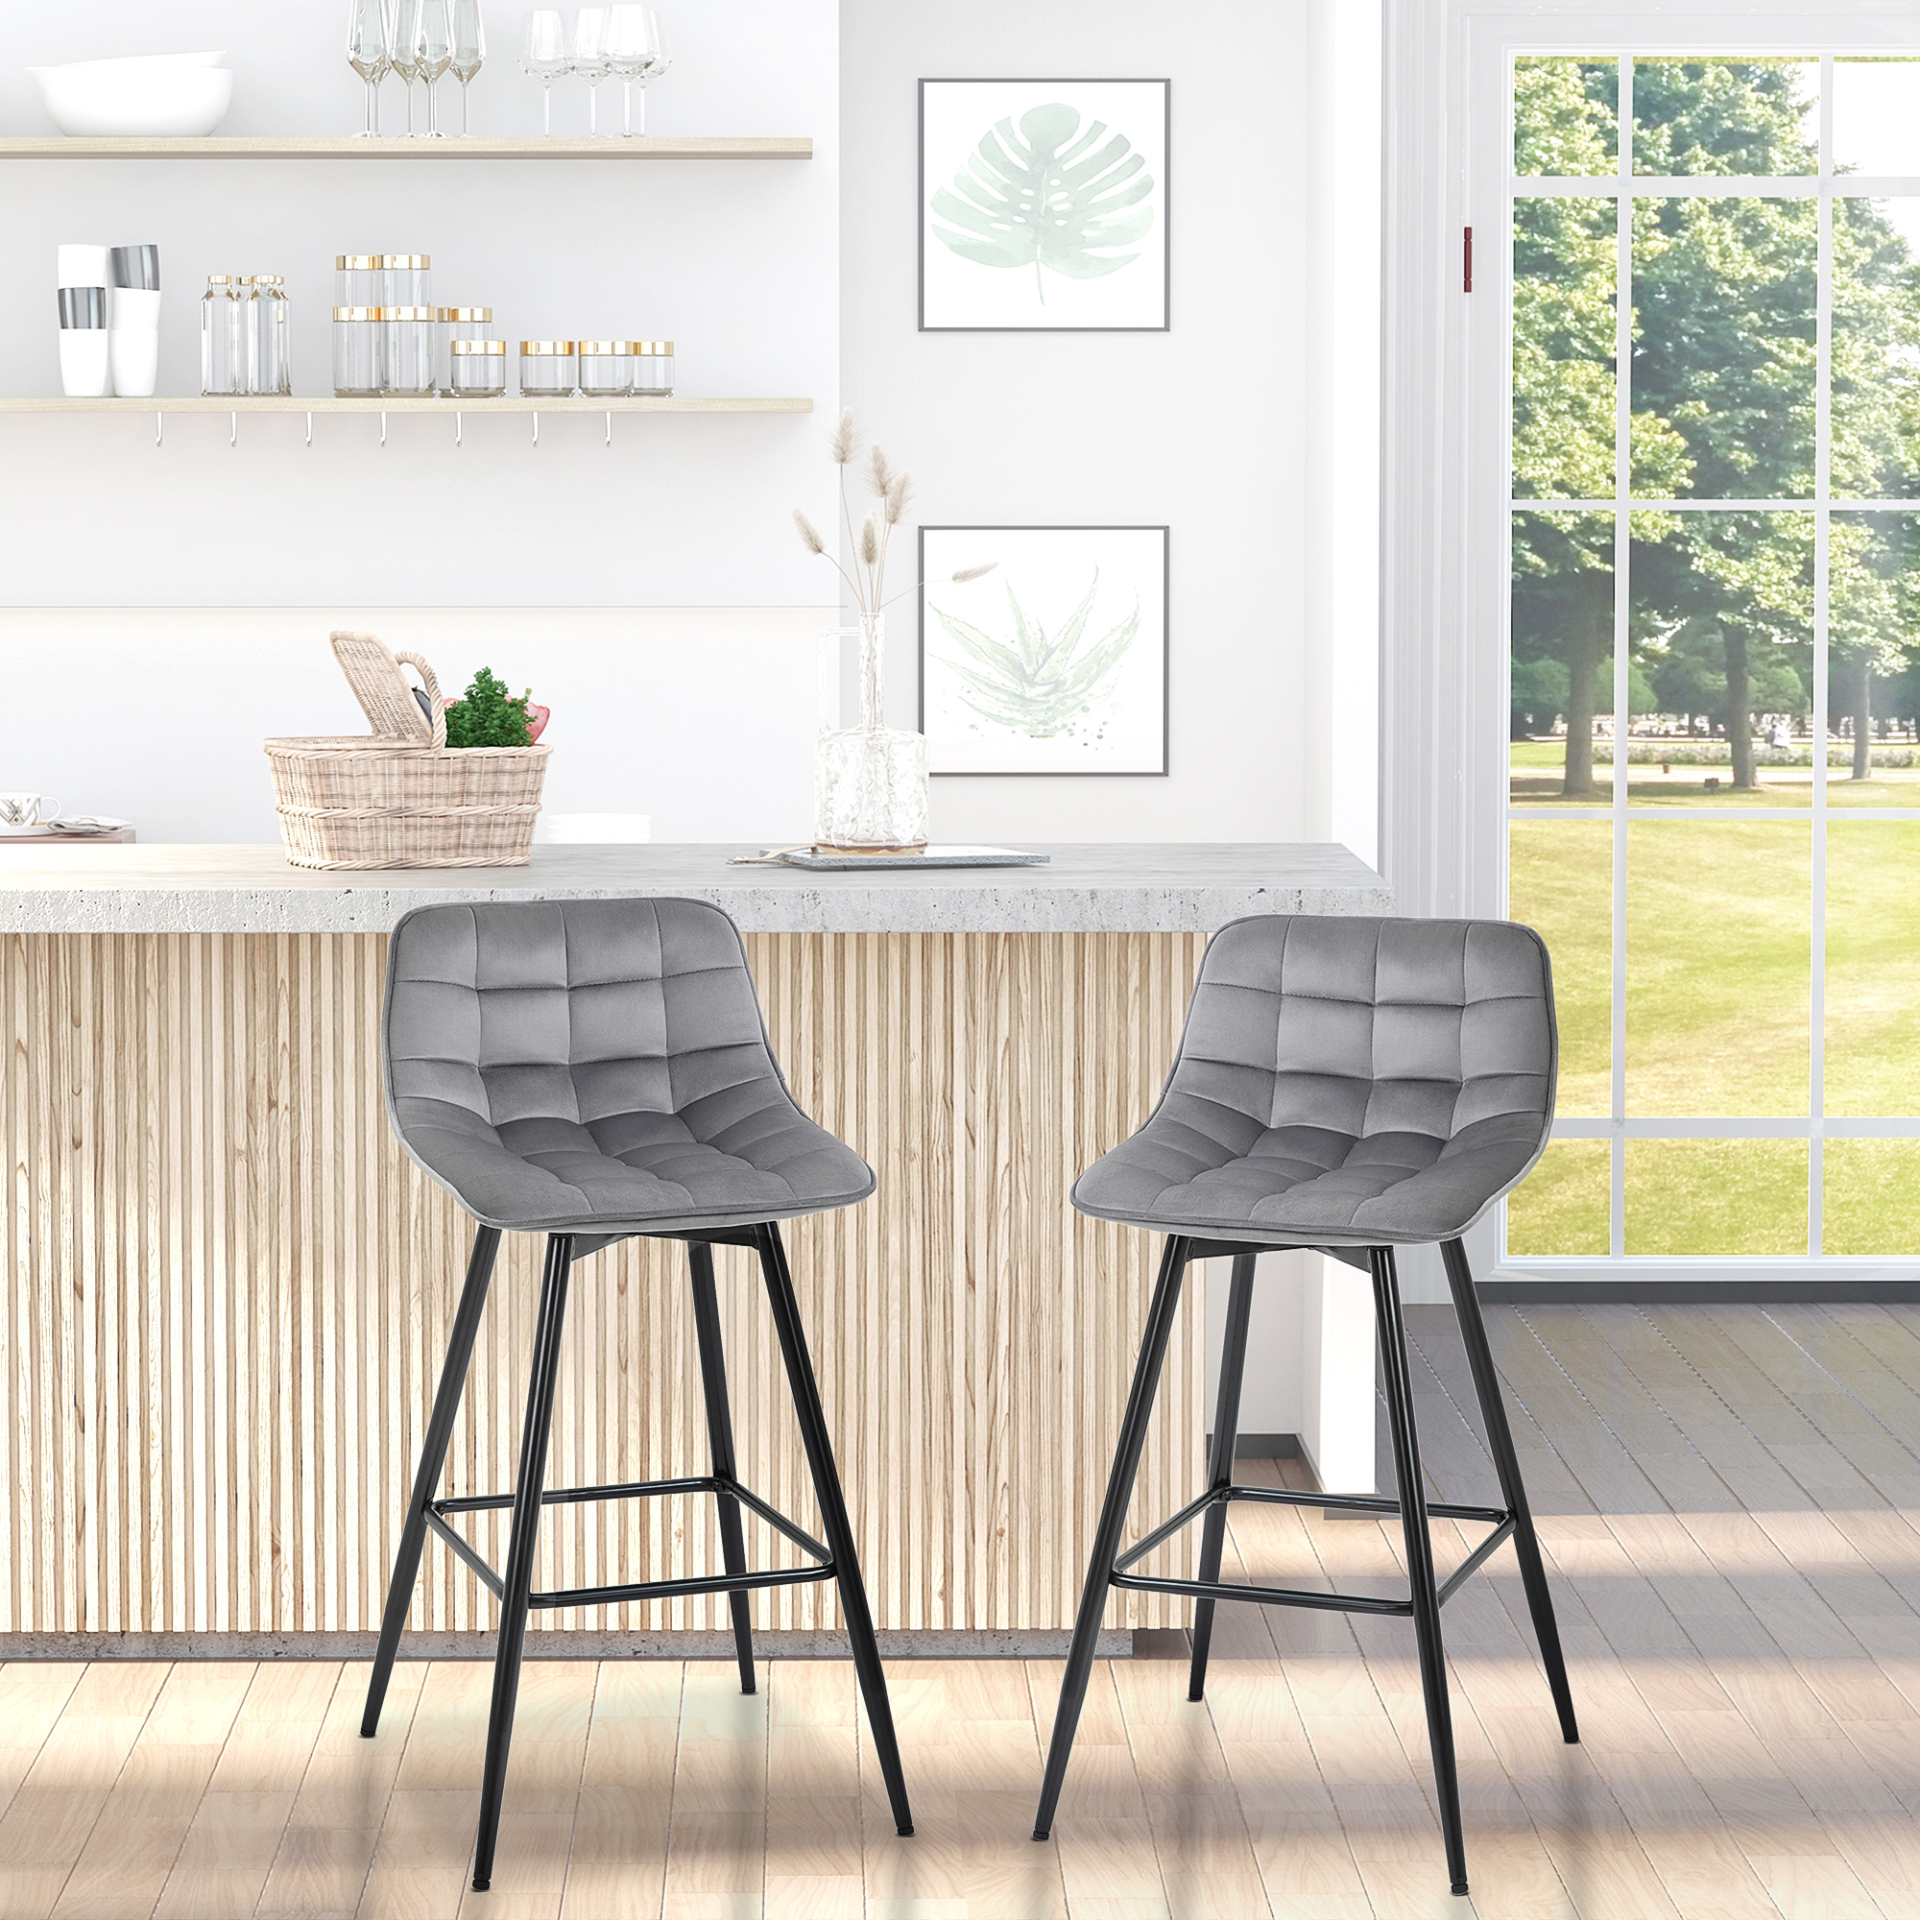 HOMCOM Set of 2 Bar Stools Velvet-Touch Dining Chairs Kitchen Counter Chairs    Fabric Upholstered seat with Metal Legs, Backrest, Grey